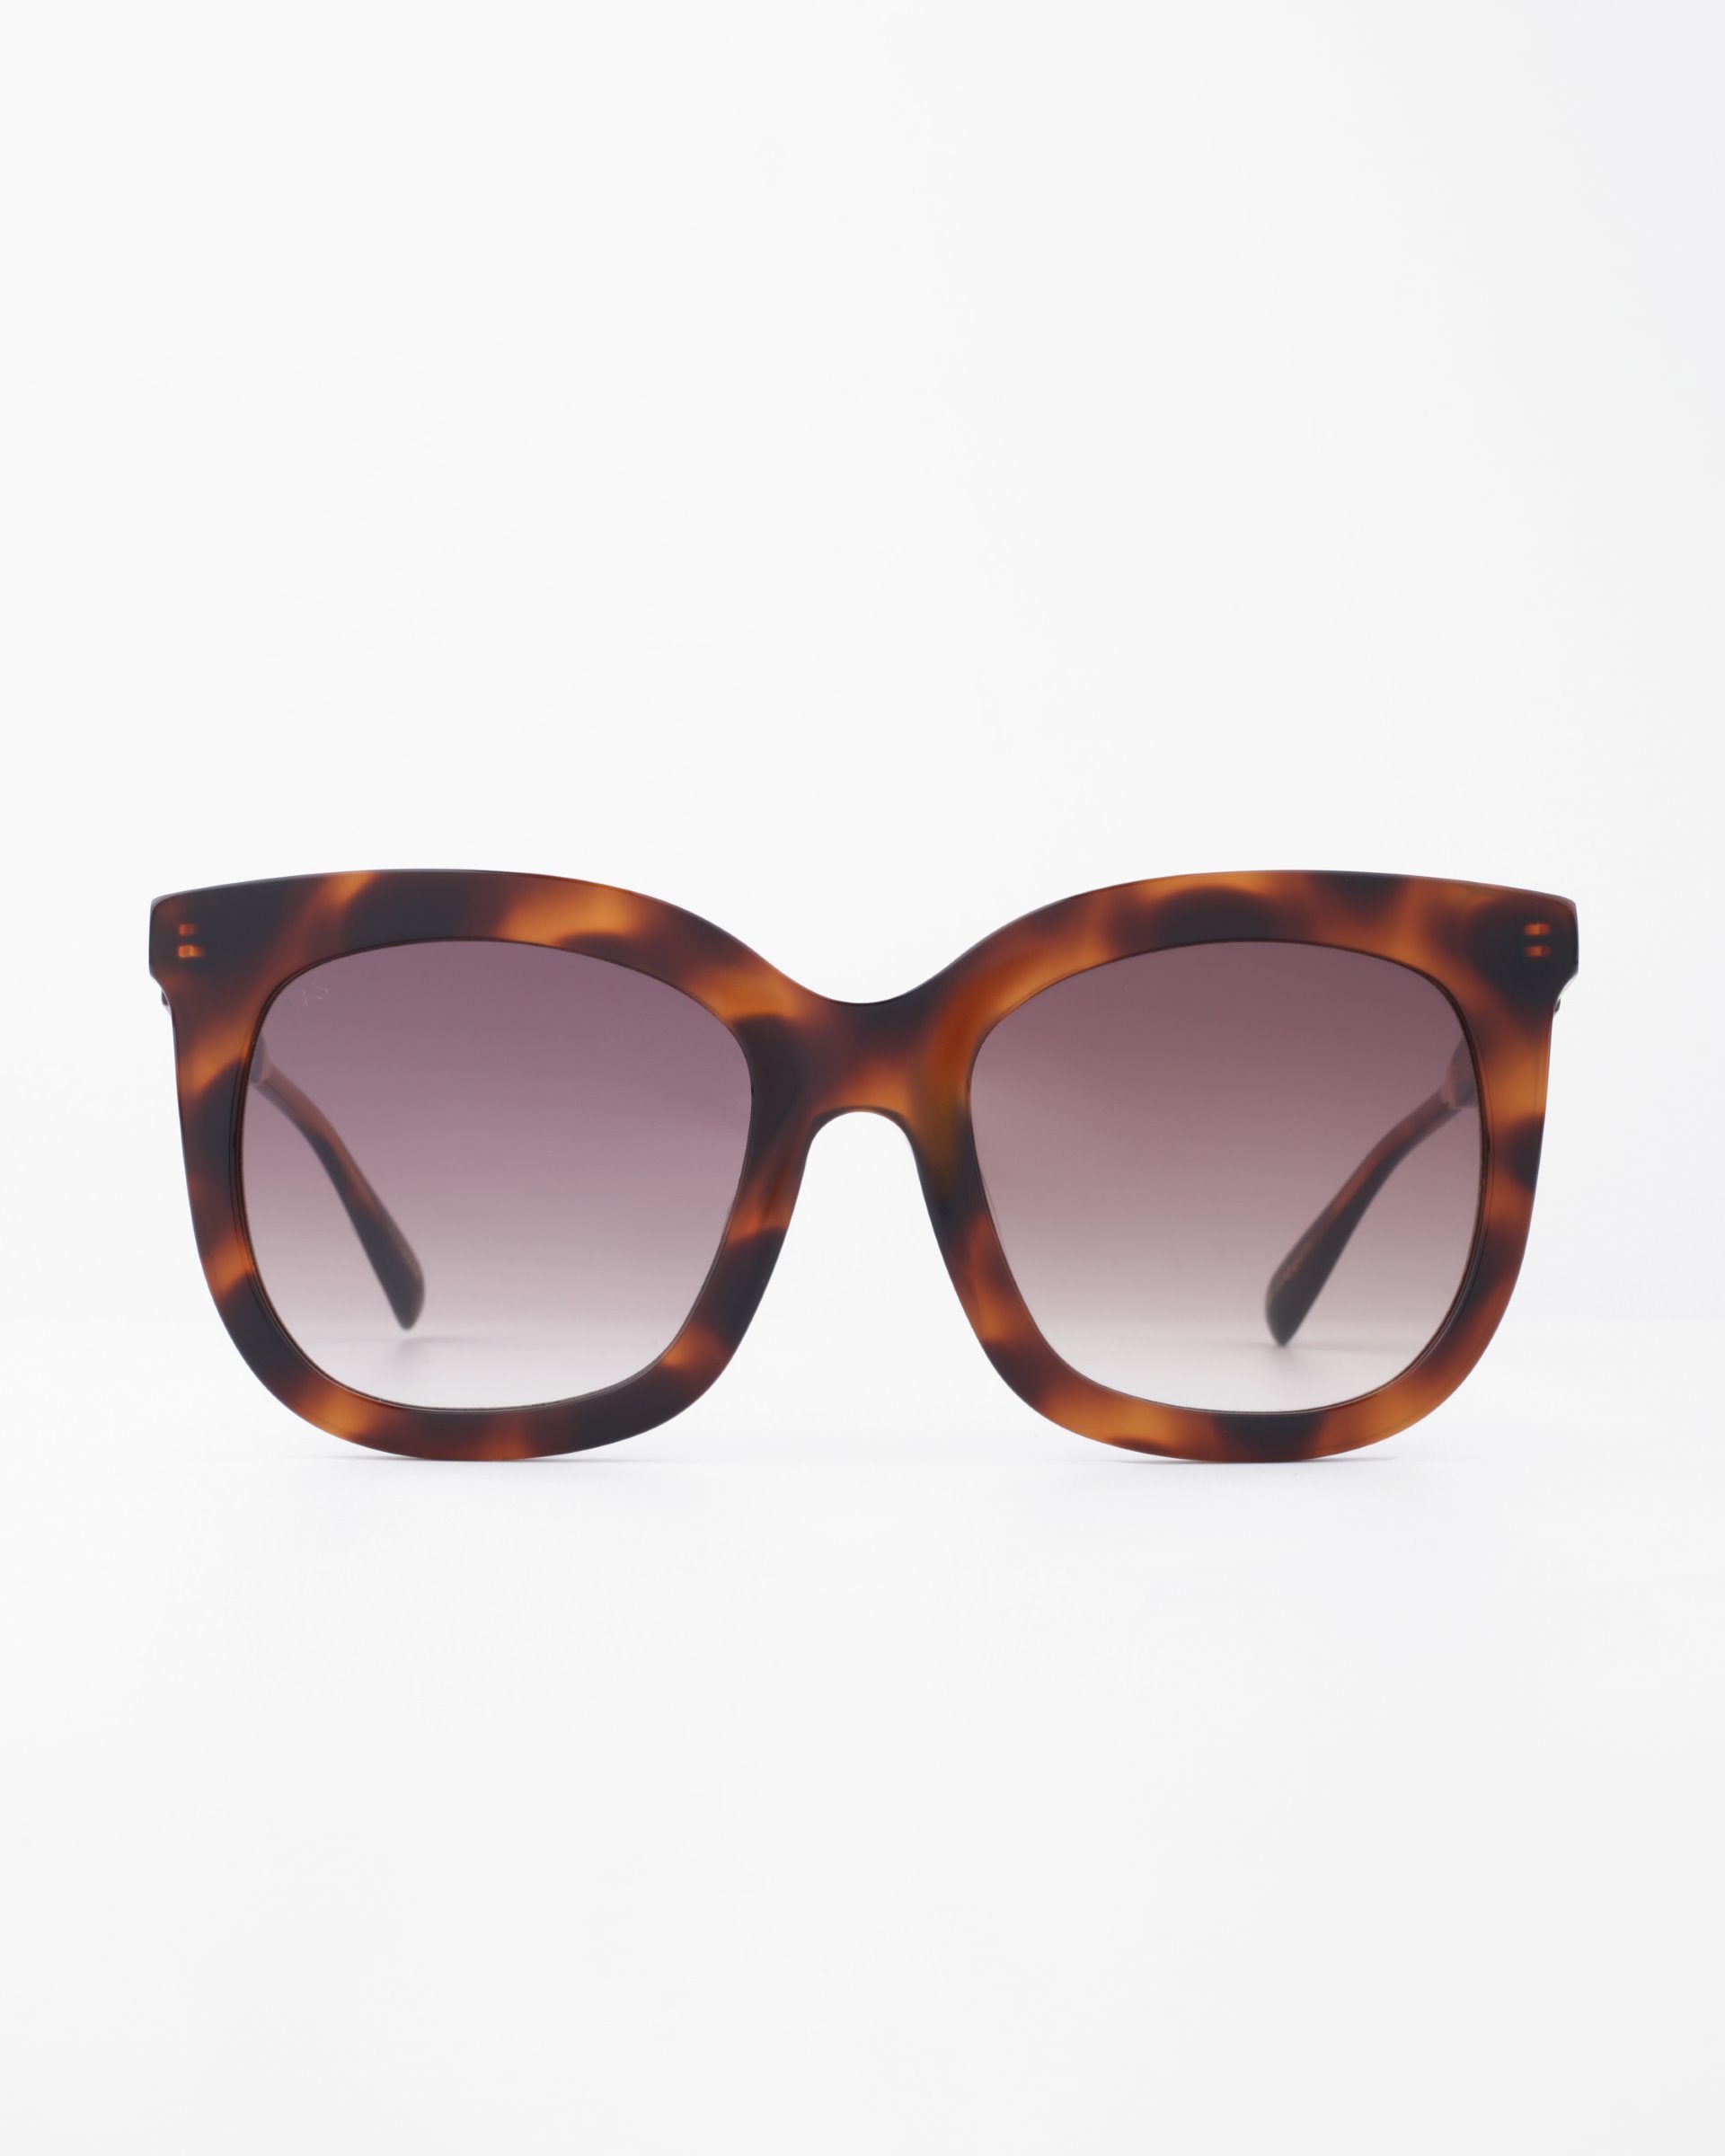 A pair of Riverside by For Art&#39;s Sake® sunglasses with a tortoiseshell handmade acetate frame and dark gradient, shatter-resistant lenses. The square-shaped frame has slightly rounded edges with gold-plated detailing. The background is plain white, highlighting the stylish eyewear.